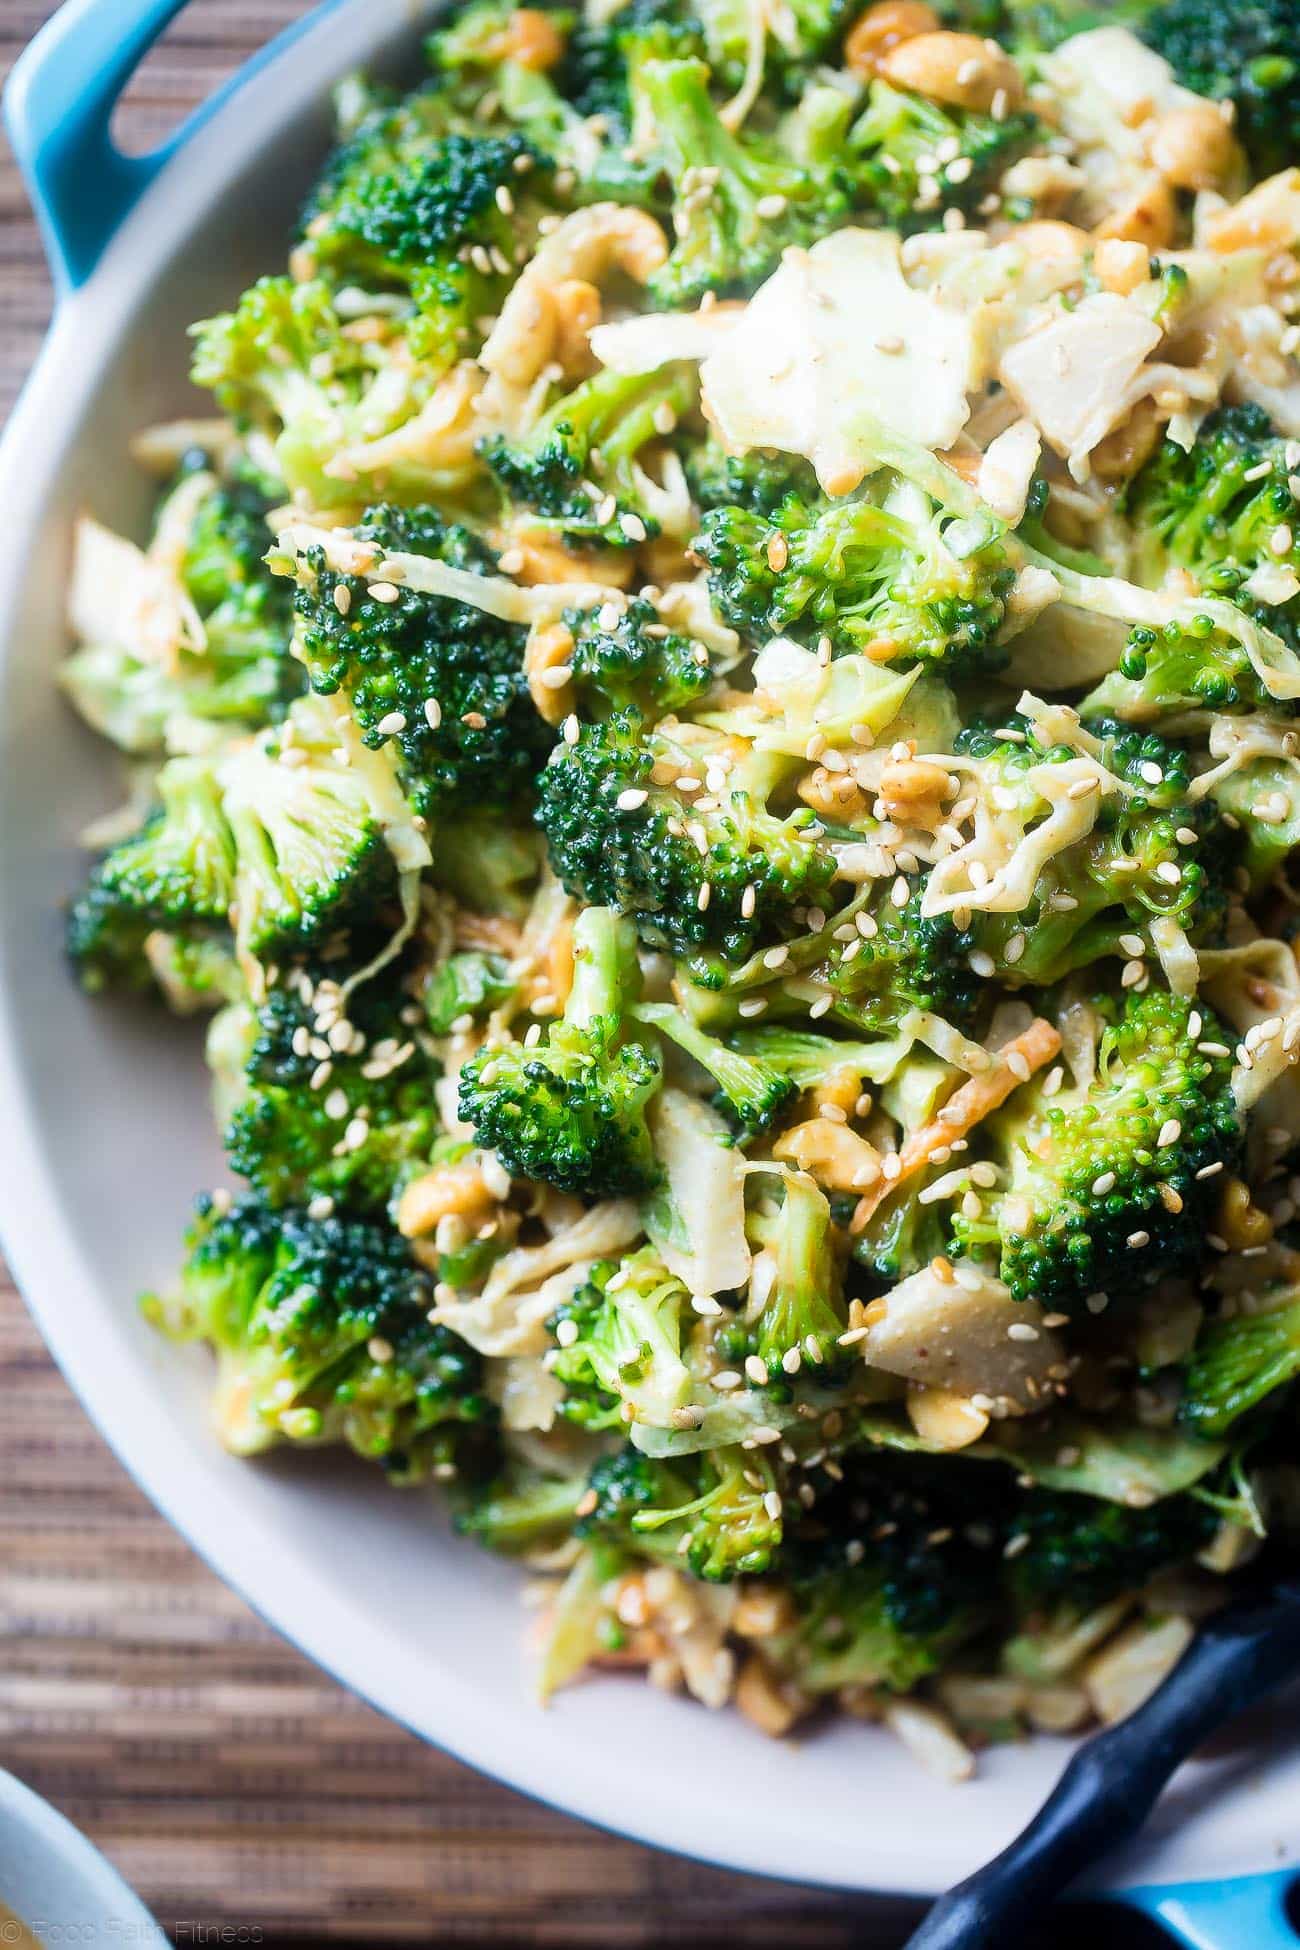 Asian Healthy Broccoli Salad - This crowd-pleasing healthy broccoli salad is a no-cook side dish, loaded with creamy peanut sauce! It's quick and easy, gluten free and vegan with a paleo option! | Foodfaithfitness.com | @FoodFaithFit